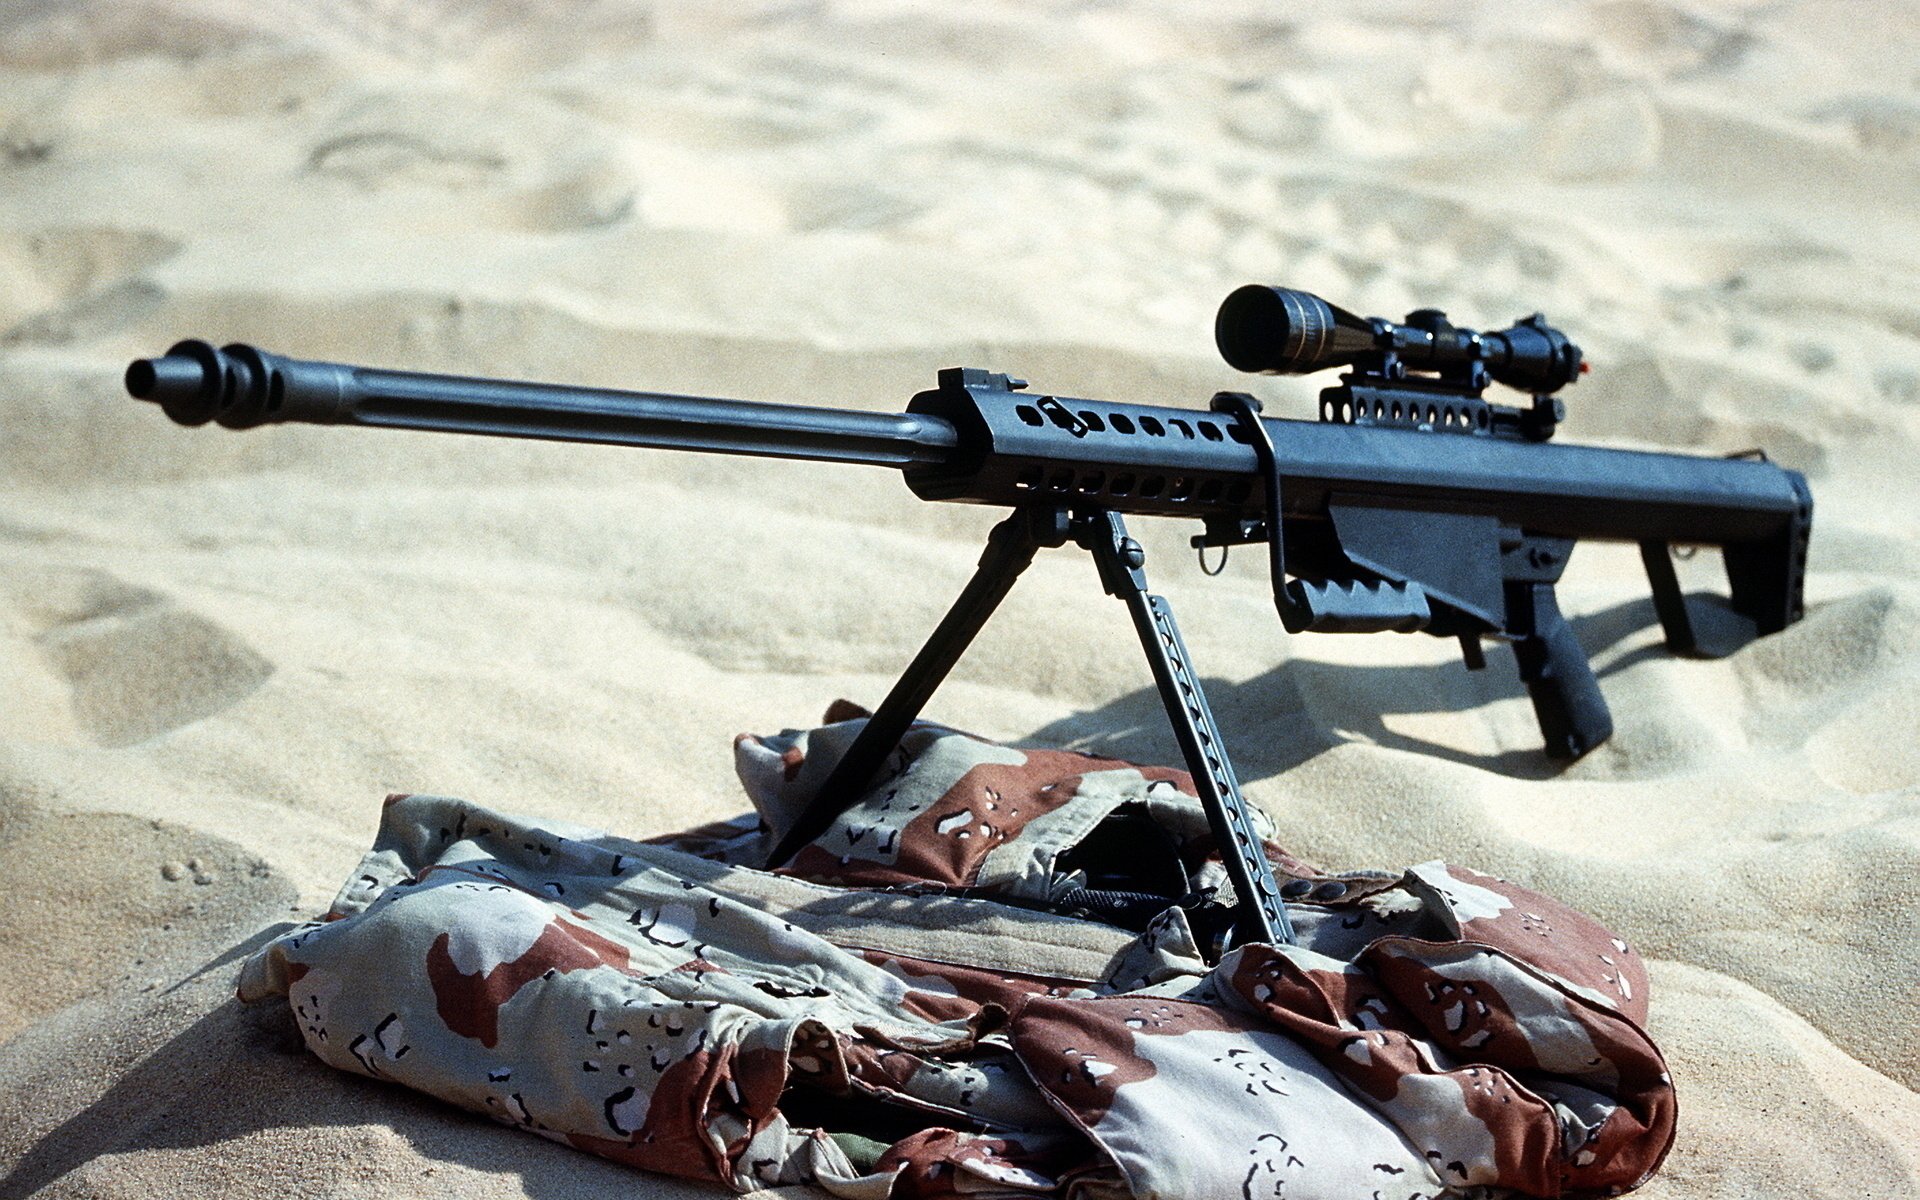 Barrett M82 Sniper Rifle Pics, Weapons Collection